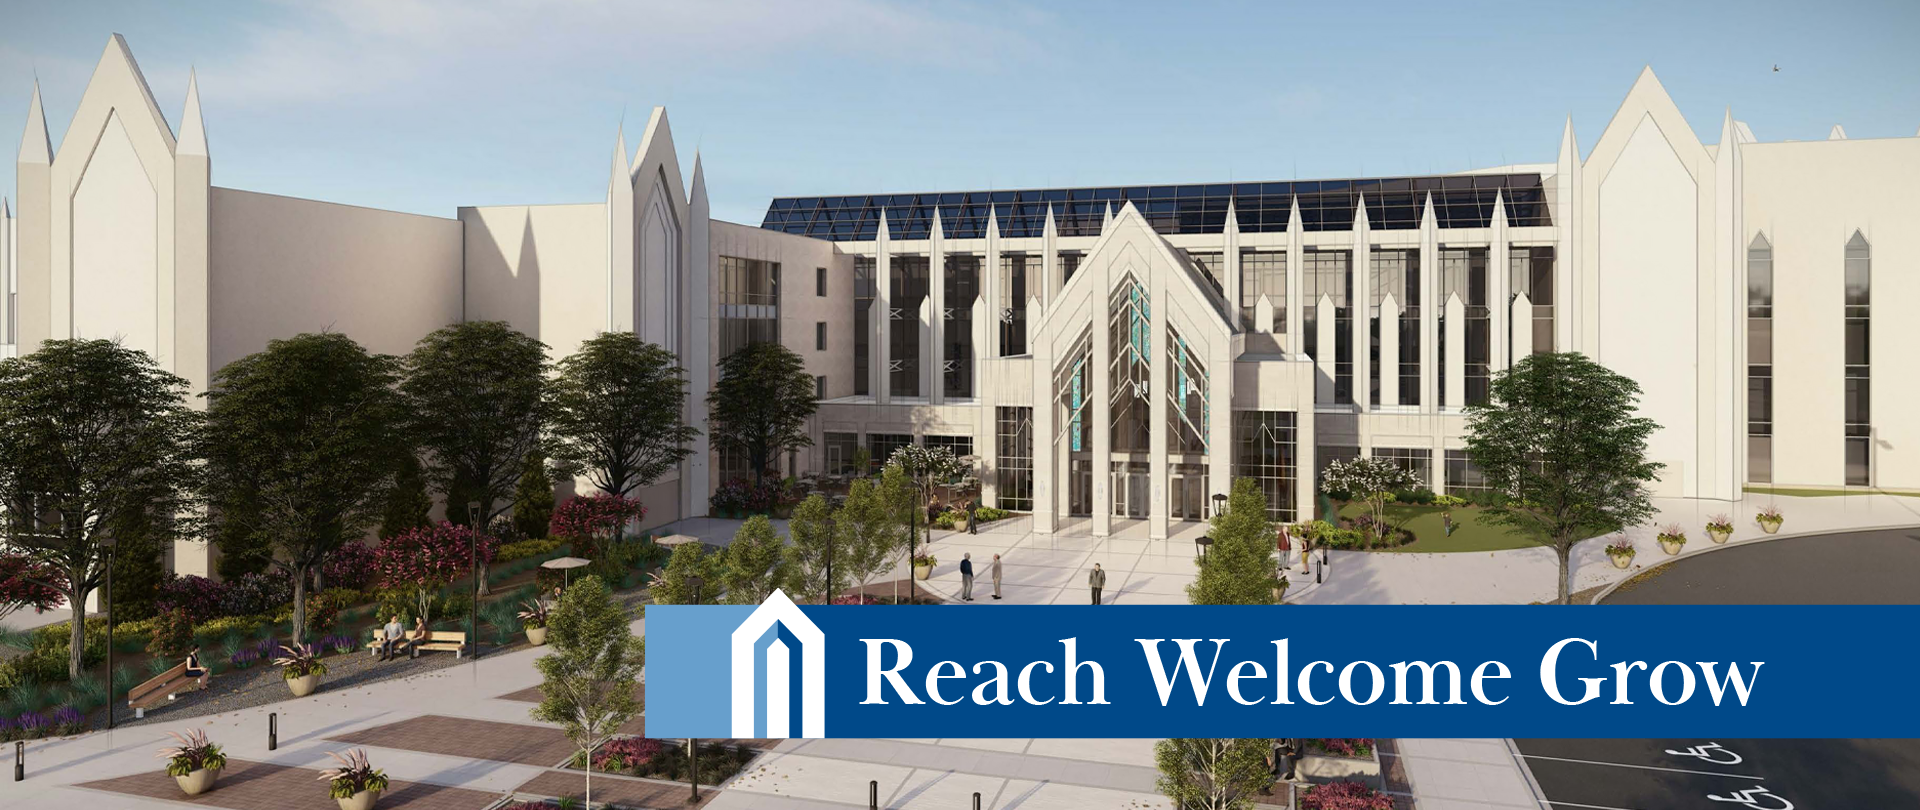 Reach Welcome Grow
Building Expansion Project
Make your Faith Promise!
